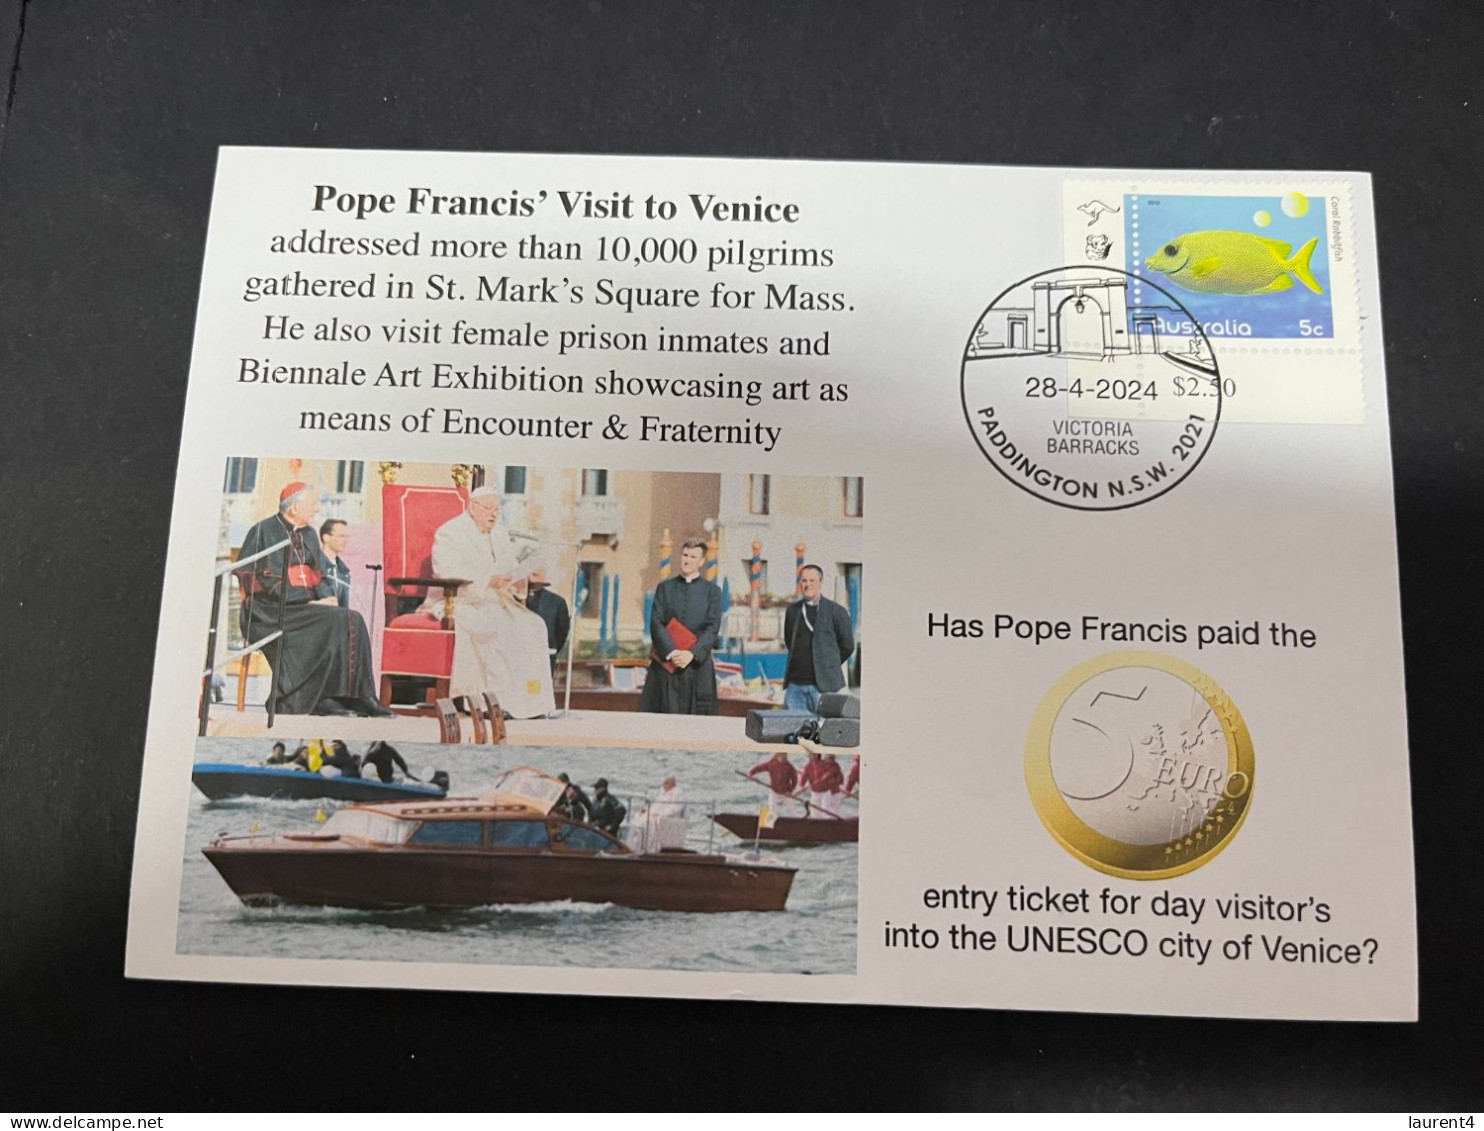 30-4-2024 (3 Z 26) Pope Francis Visit To Venice In Italy (28-4-2024) OZ Stamp (1 Cover) 5 Euro Visit Fee Paid ? - Cristianesimo